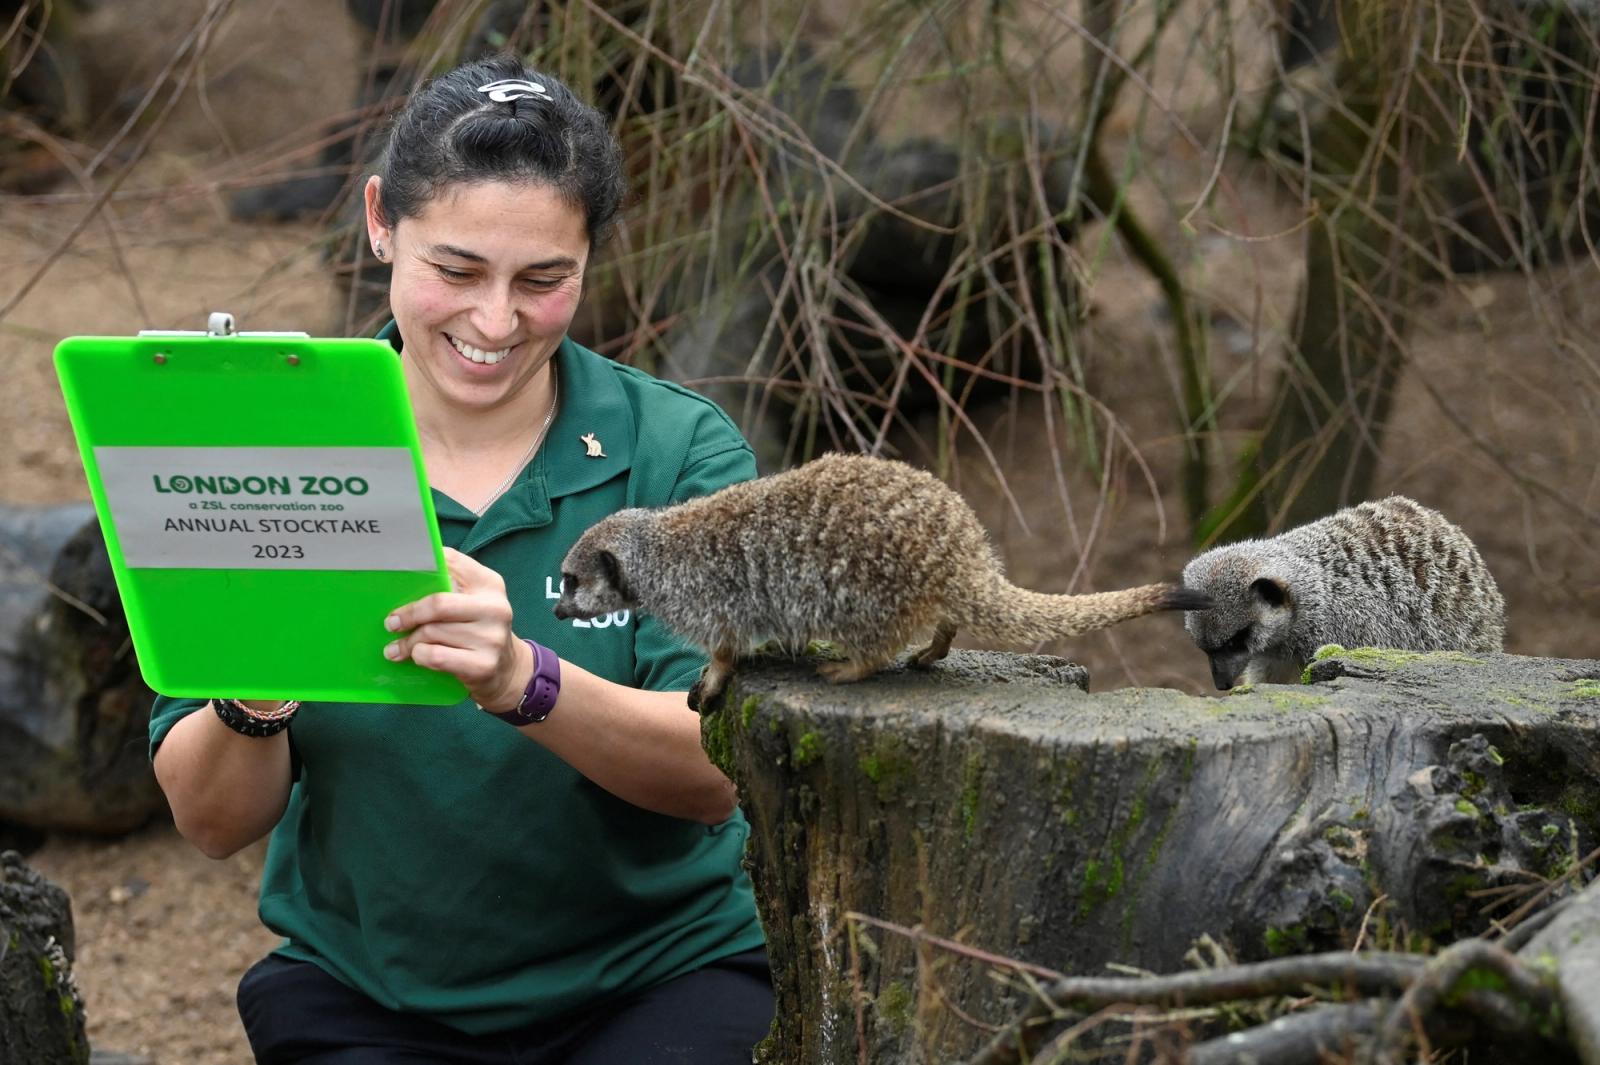 Keeper Veronica Heldt poses with a clipboard as she counts meerkats during the annual stocktake at ZSL London Zoo in London, Britain.